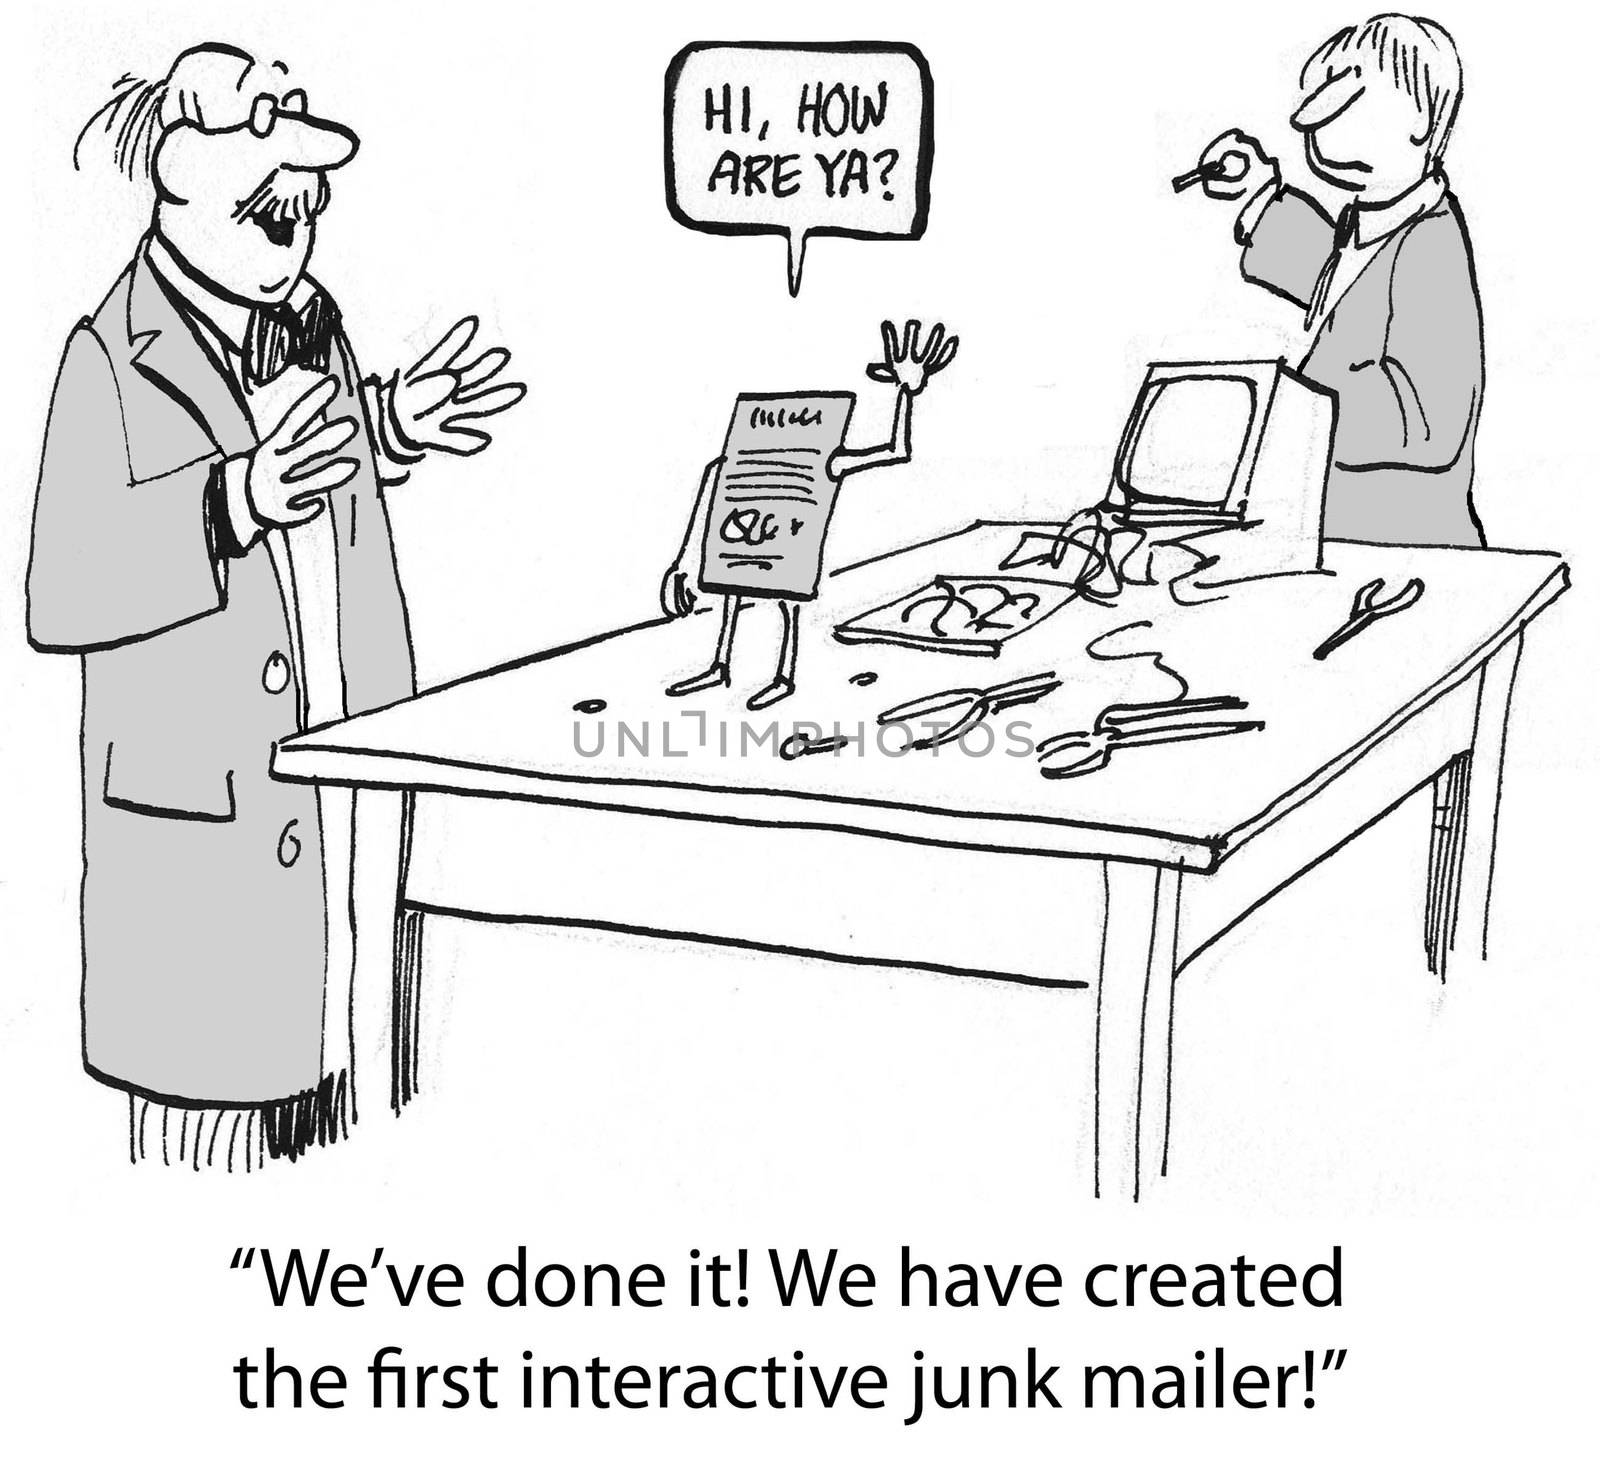 "We have done it. We have created the first interactive junk mailer."